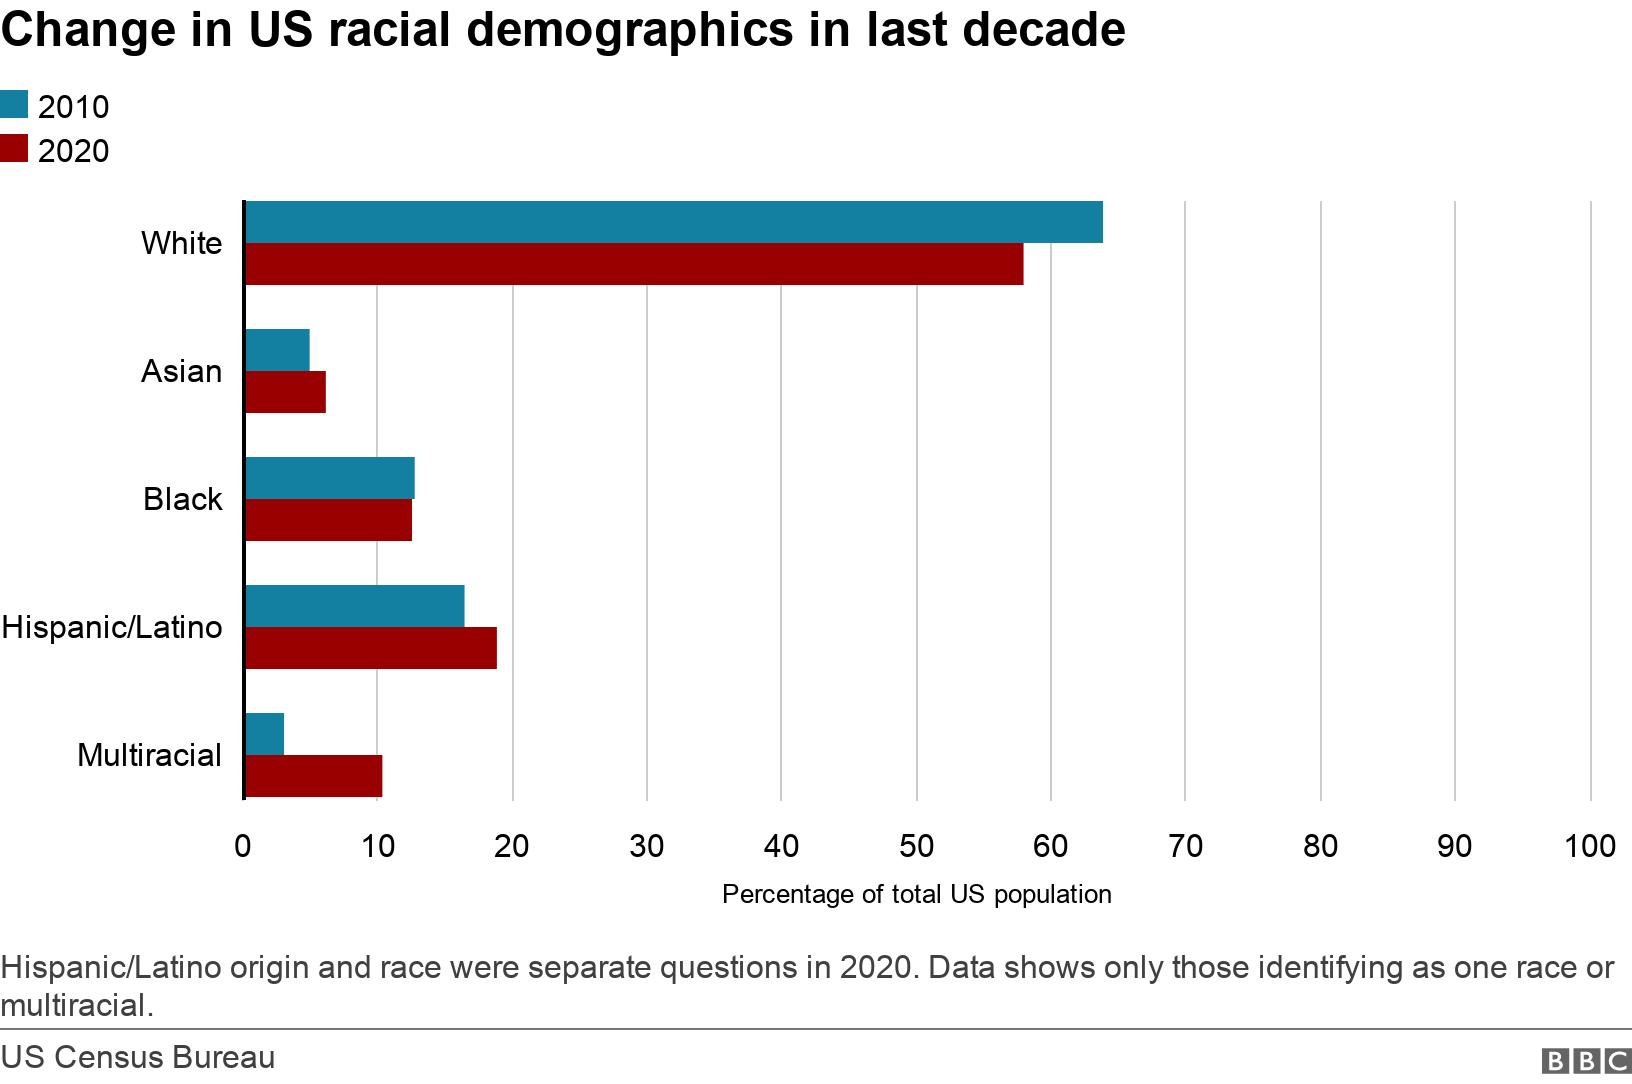 Change in US racial demographics in last decade. .  Hispanic/Latino origin and race were separate questions in 2020. Data shows only those identifying as one race or multiracial..